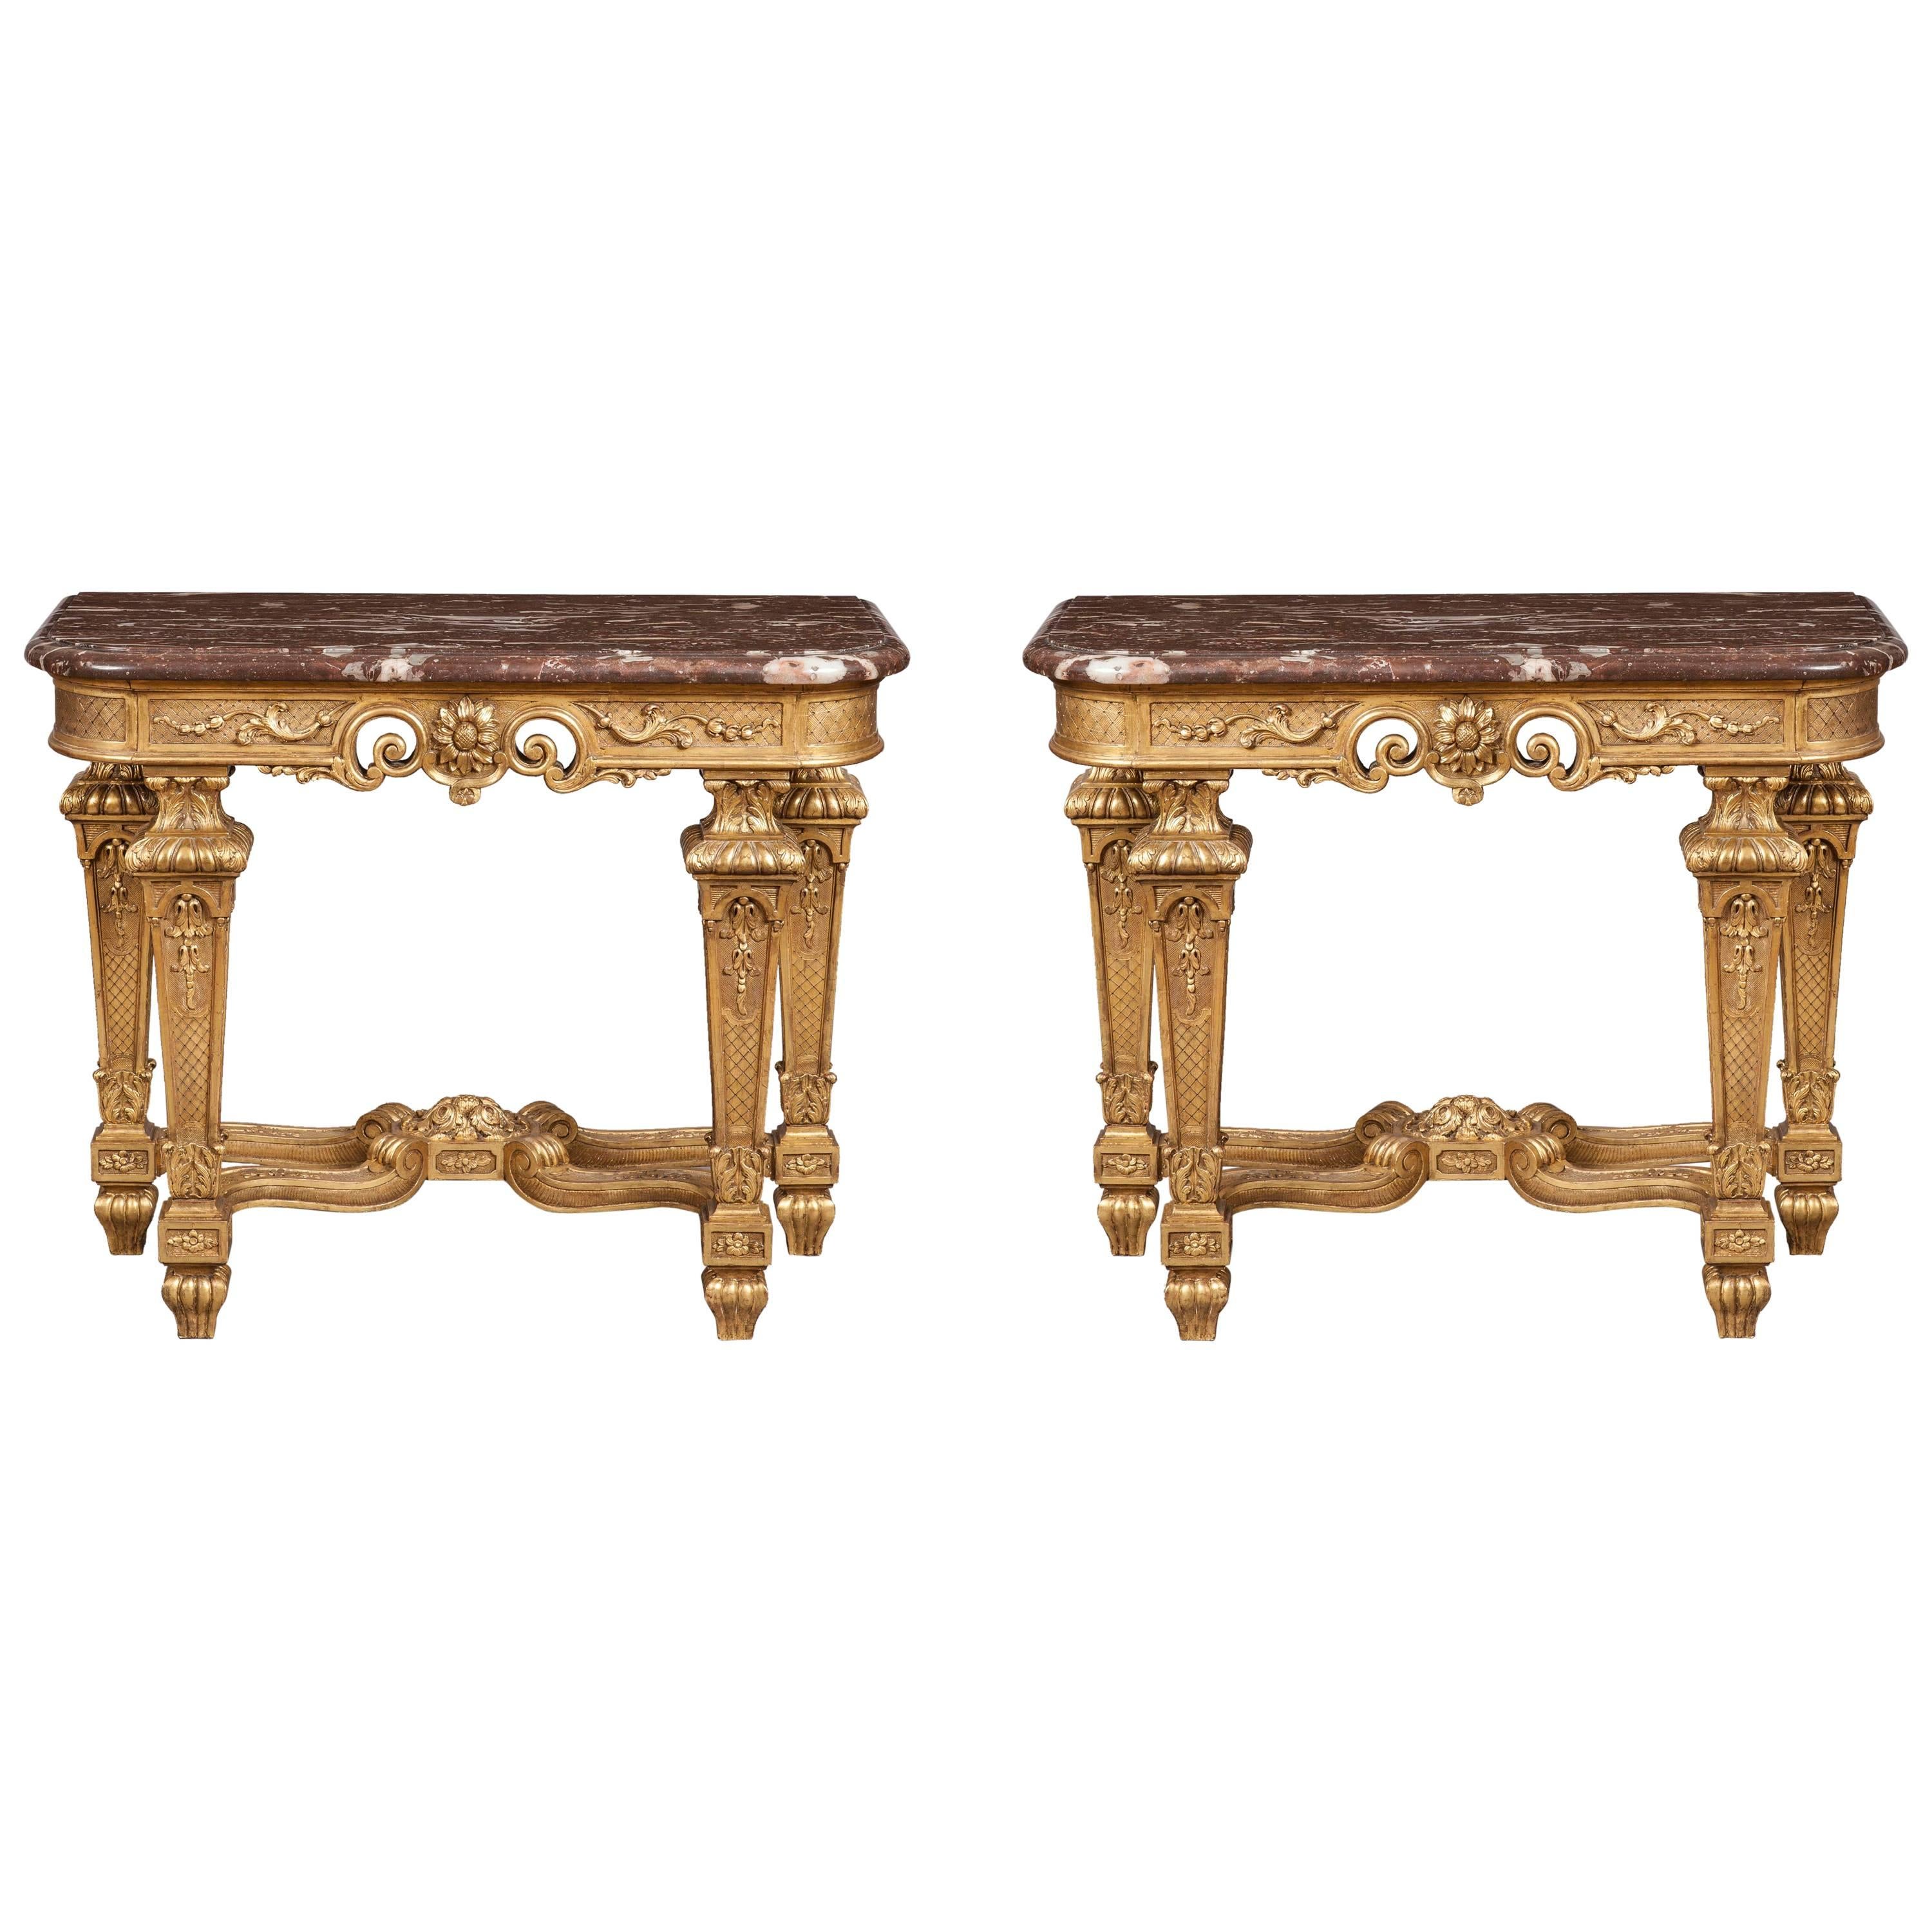 A Pair of Antique French Console Tables in the Régence Manner